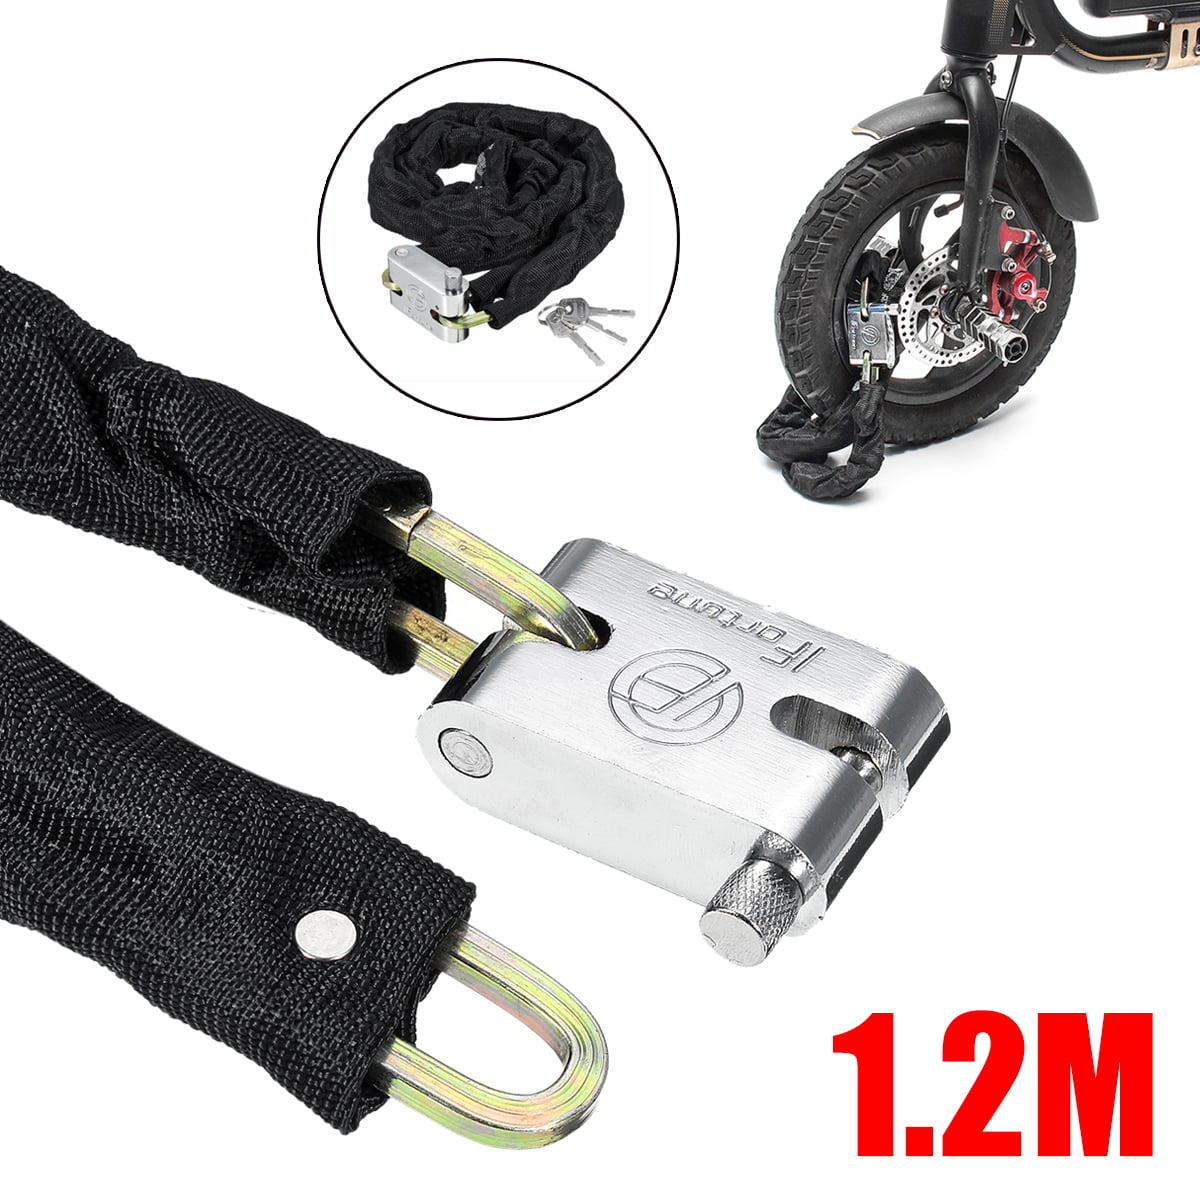 Gray Black Bike Security Lock Heavy Duty 4 Digit Combination Code Lock Anti-Theft Steel Chain Lock for Bicycle Motorcycle Gates Fences Glass Doors